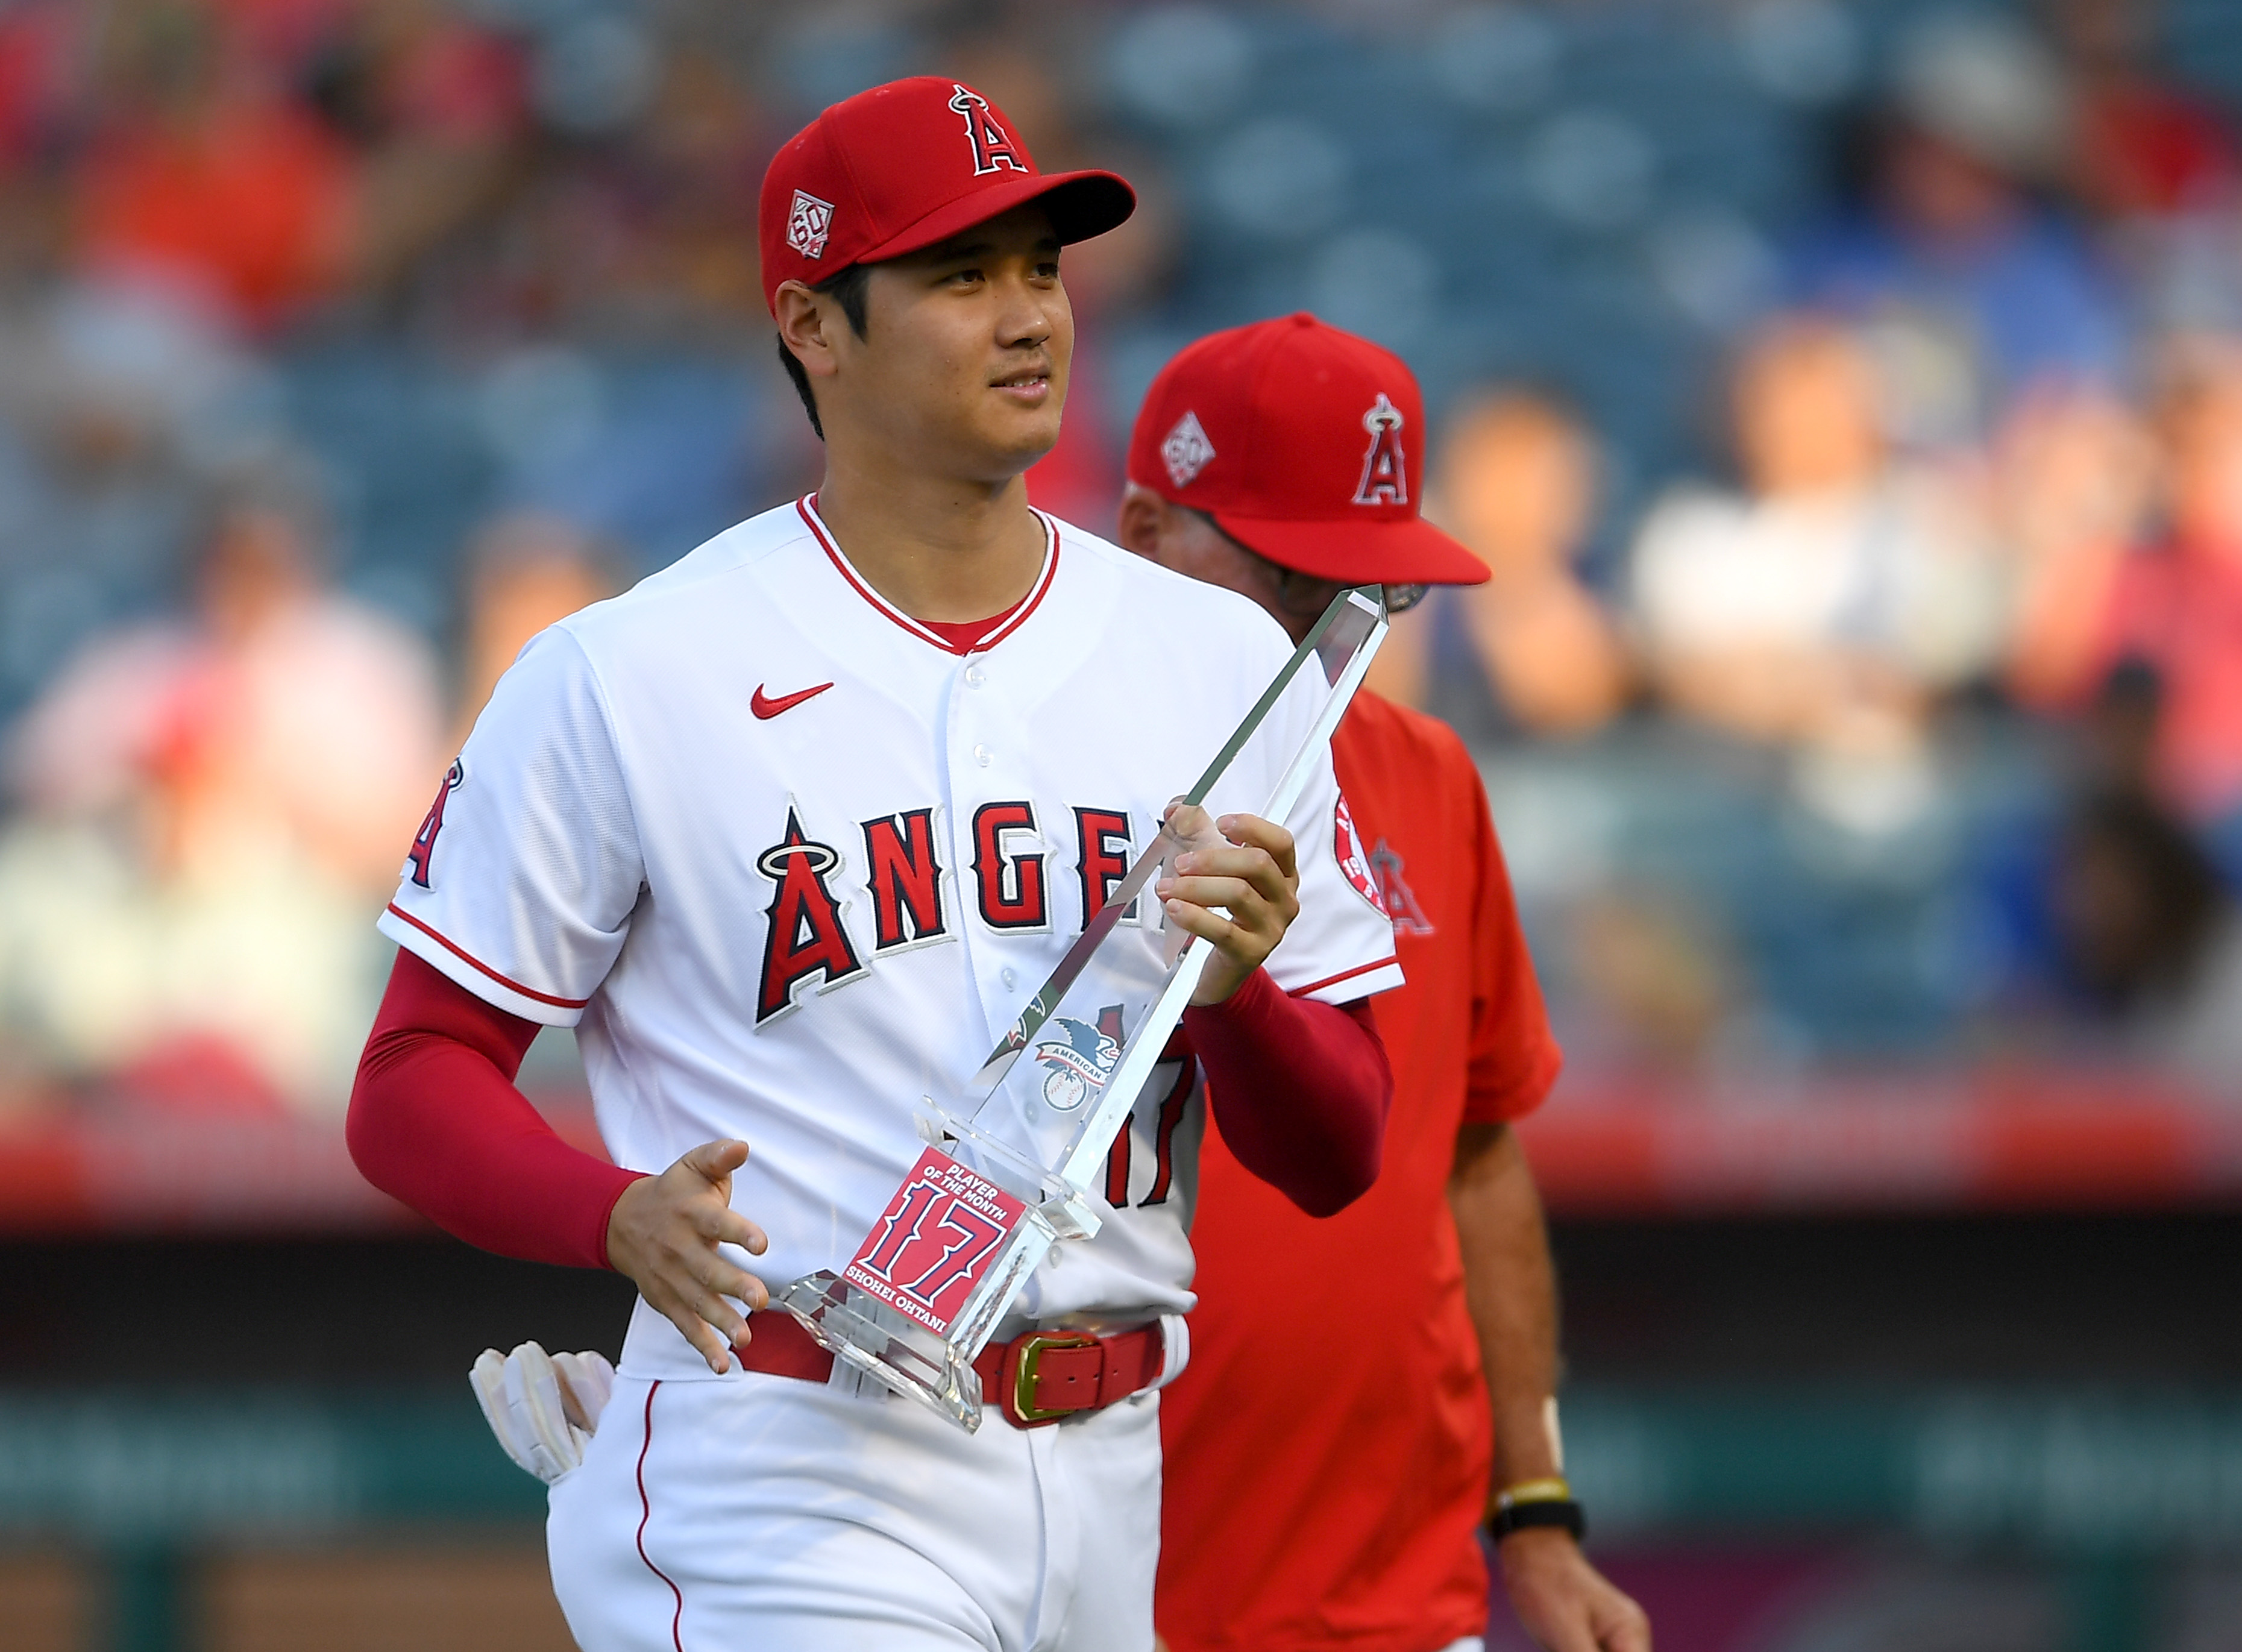 Ohtani becomes first Japanese player to have top-selling MLB